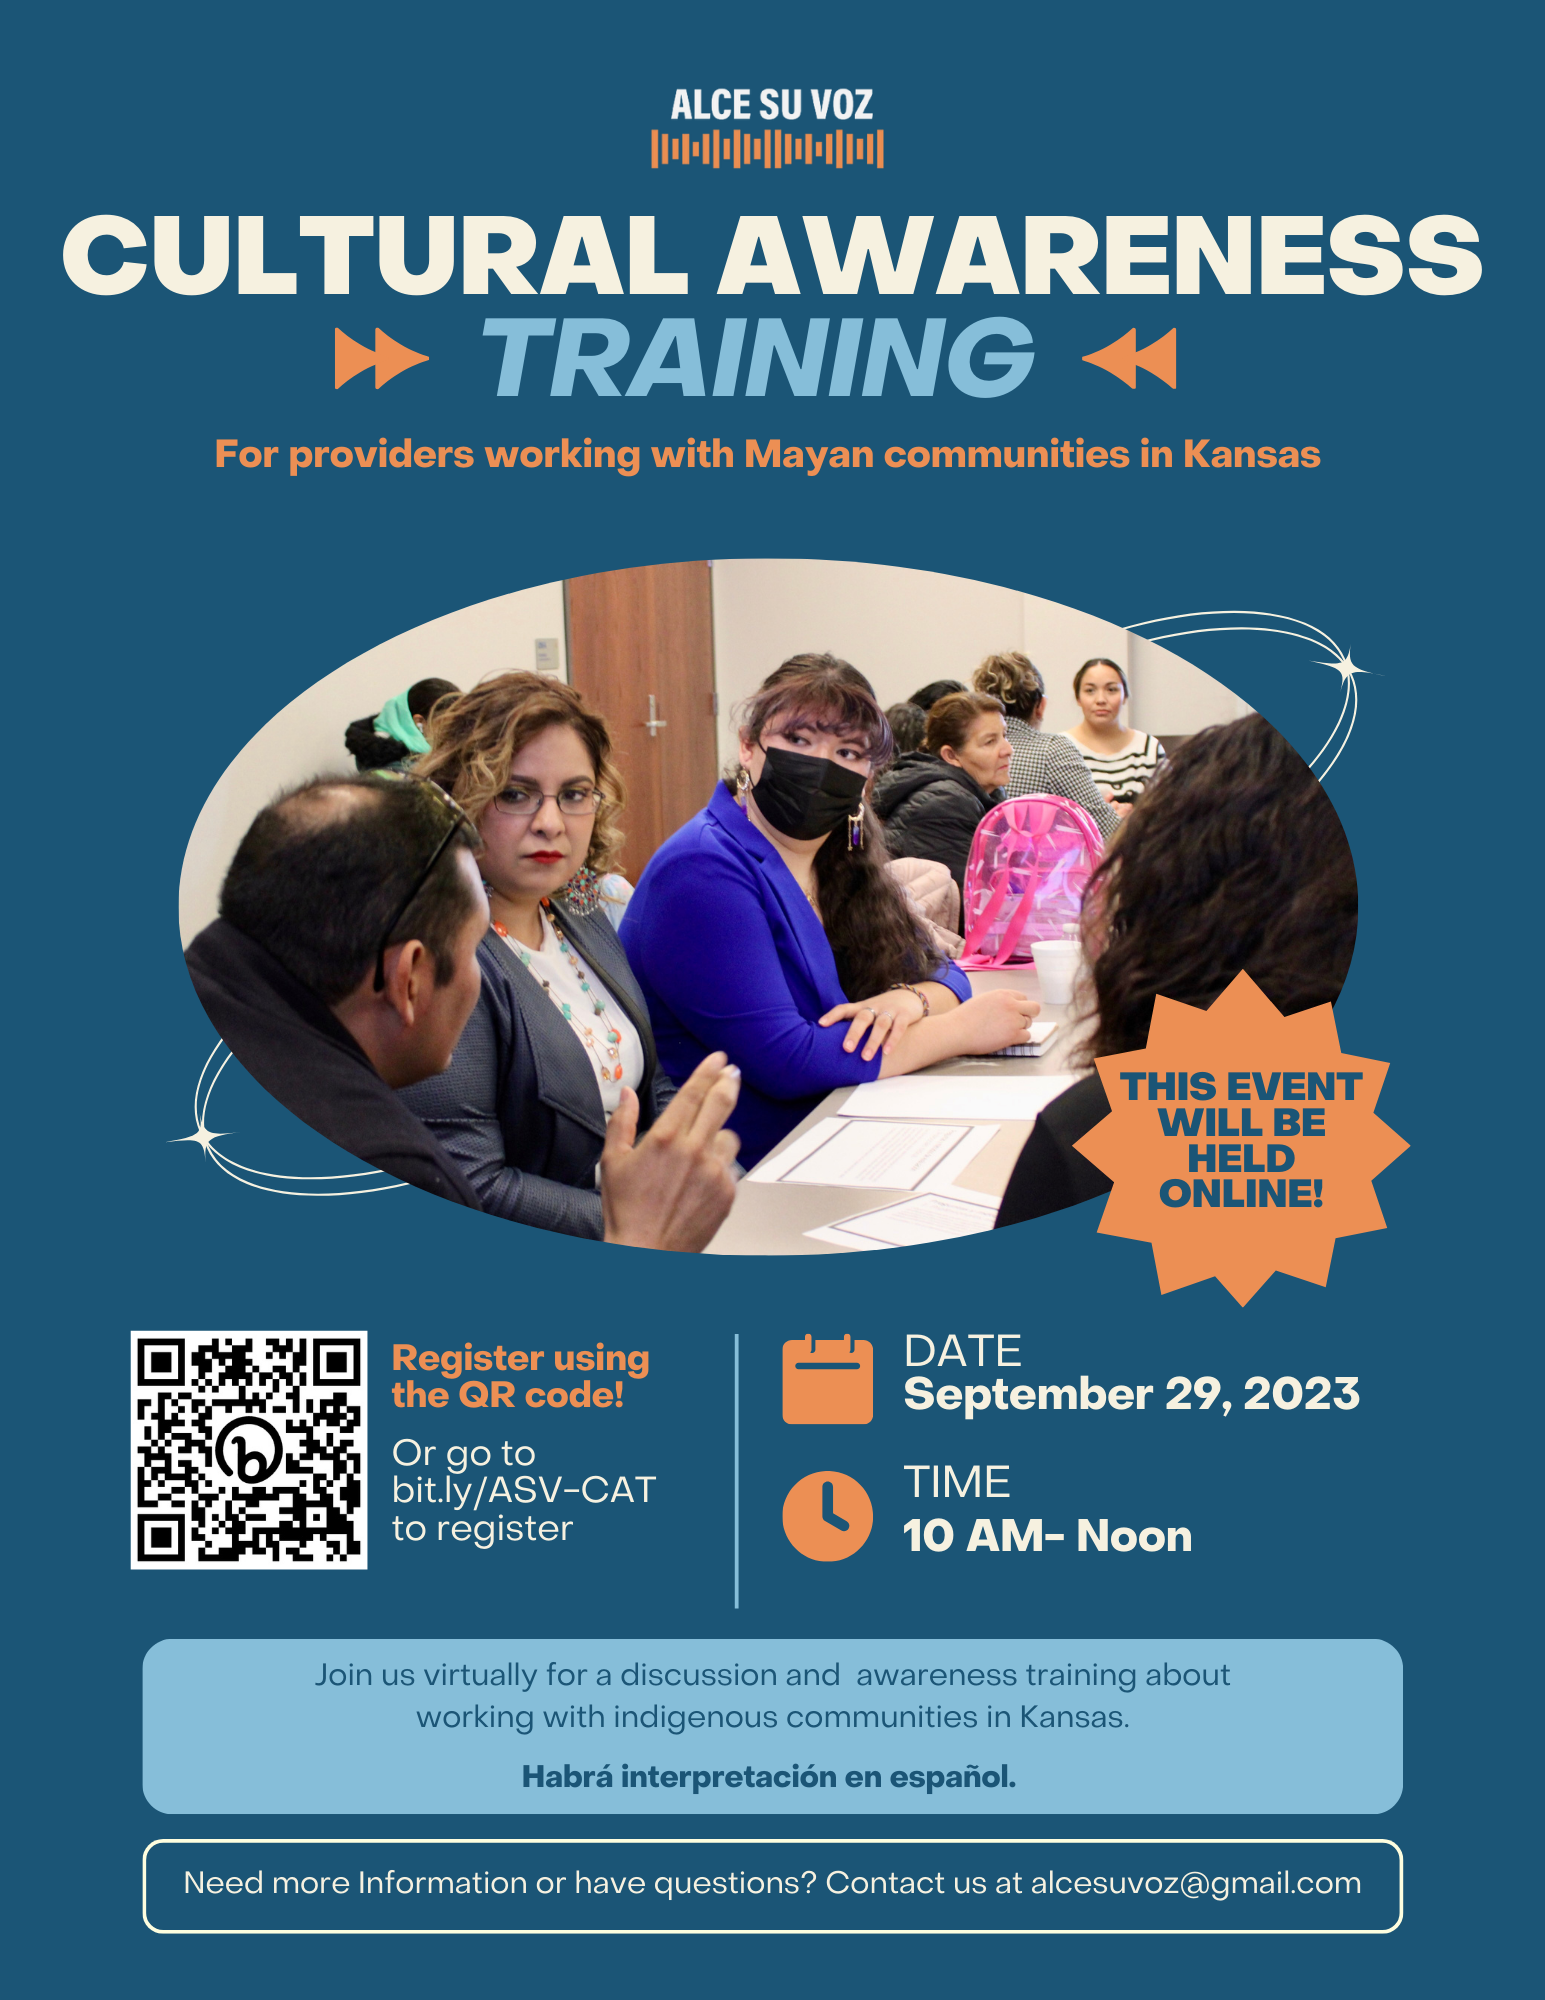 Flyer for the event with basic information and photo of people in discussion